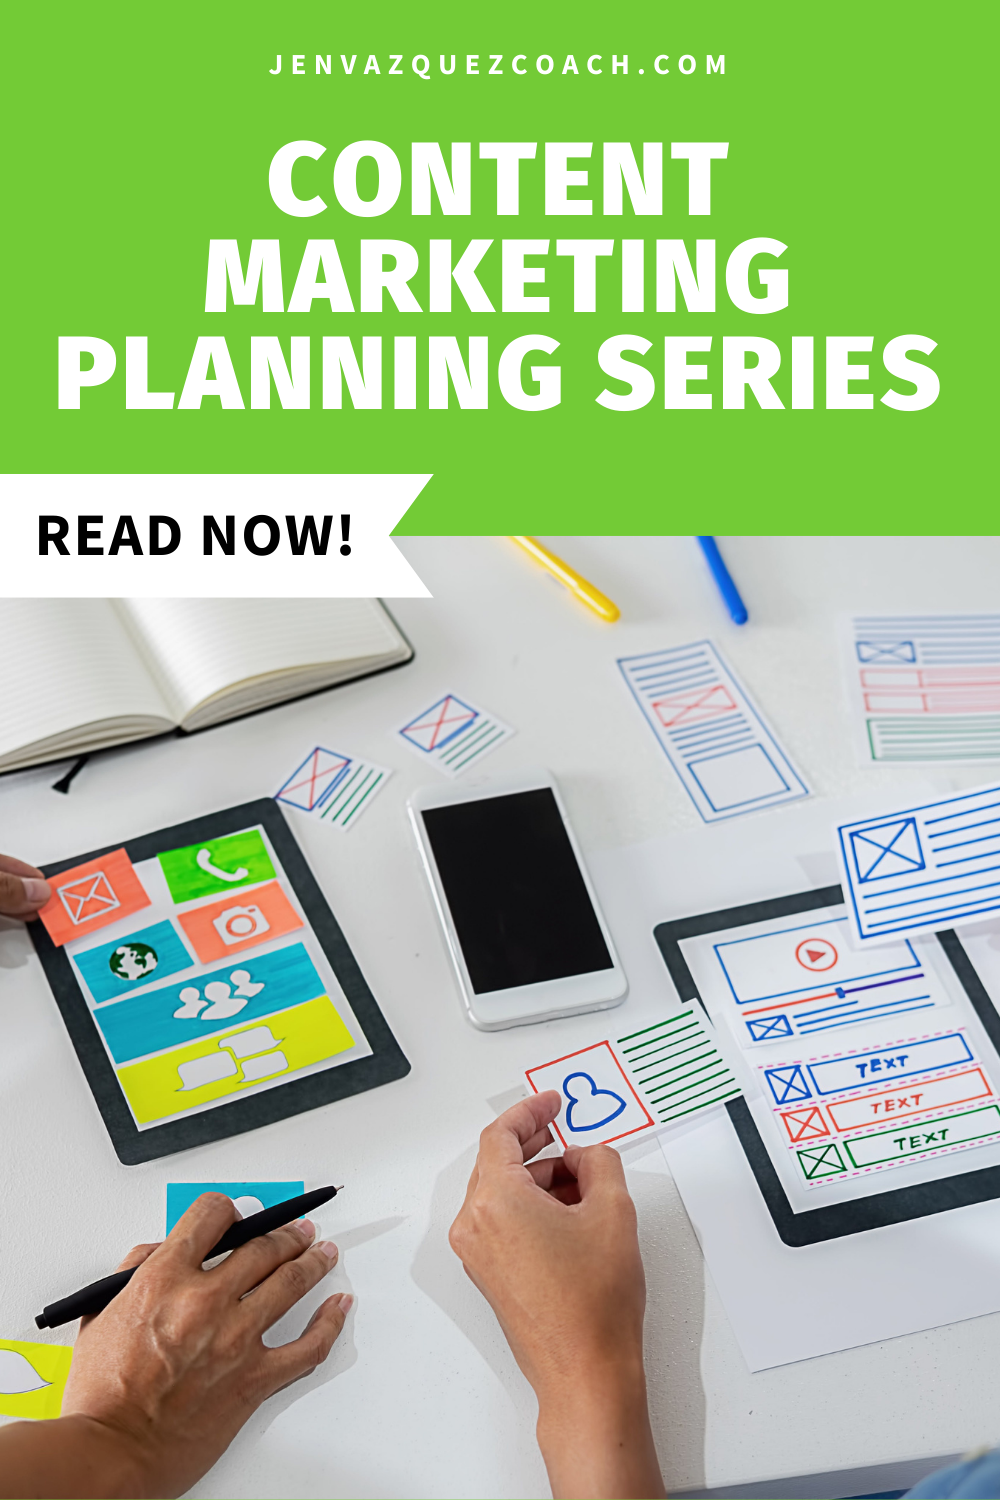 Content Marketing Planning Series Part 2: Quarterly Content Planning Based on Data Insights by Jen Vazquez Media